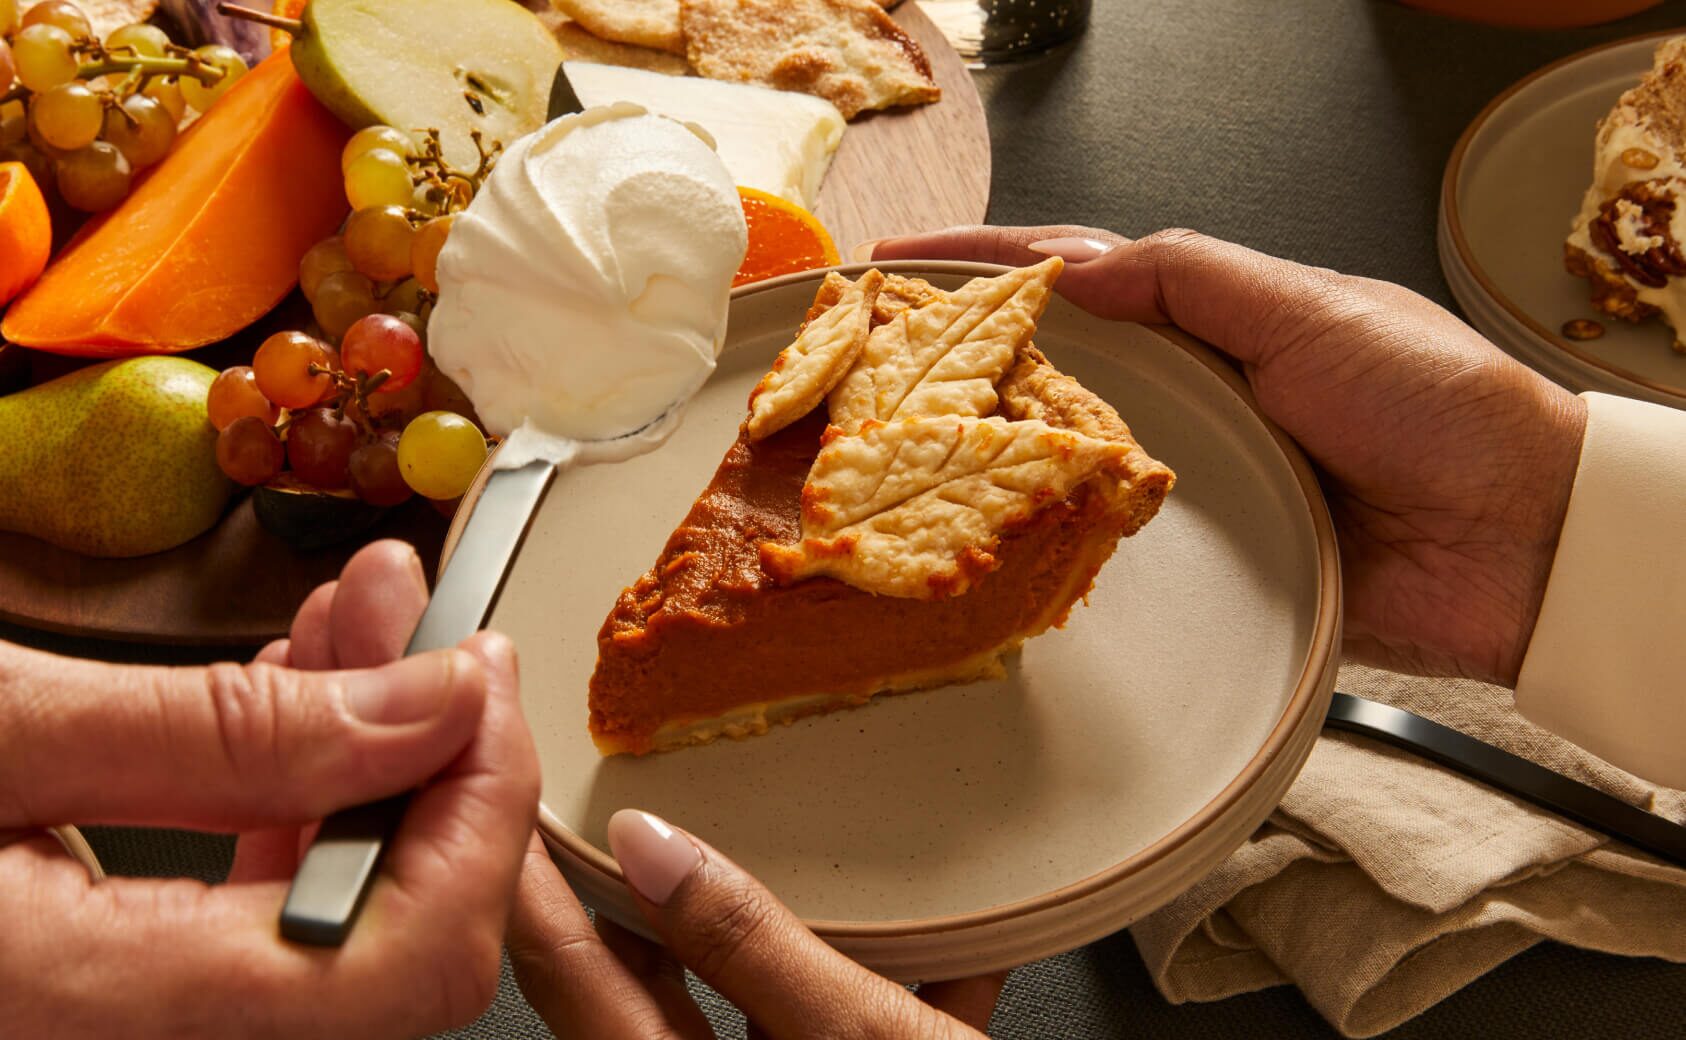 Slice of pumpkin pie being served on a plate.